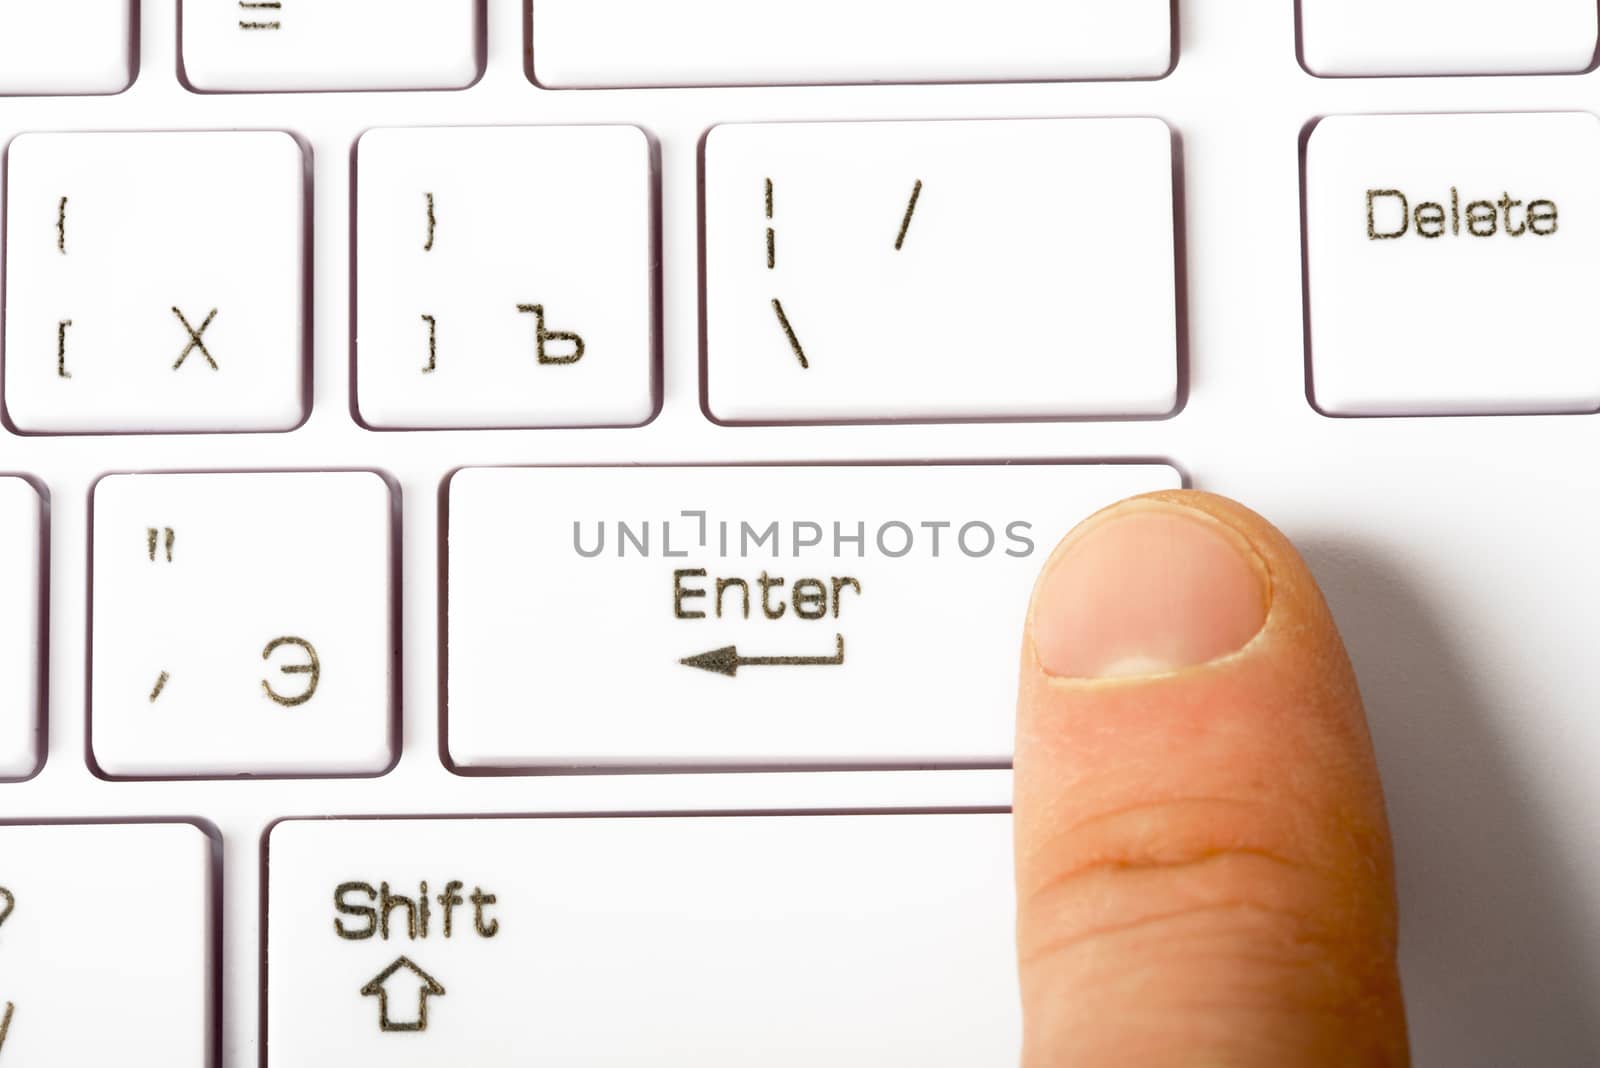 Closeup view of white keyboard with human finger